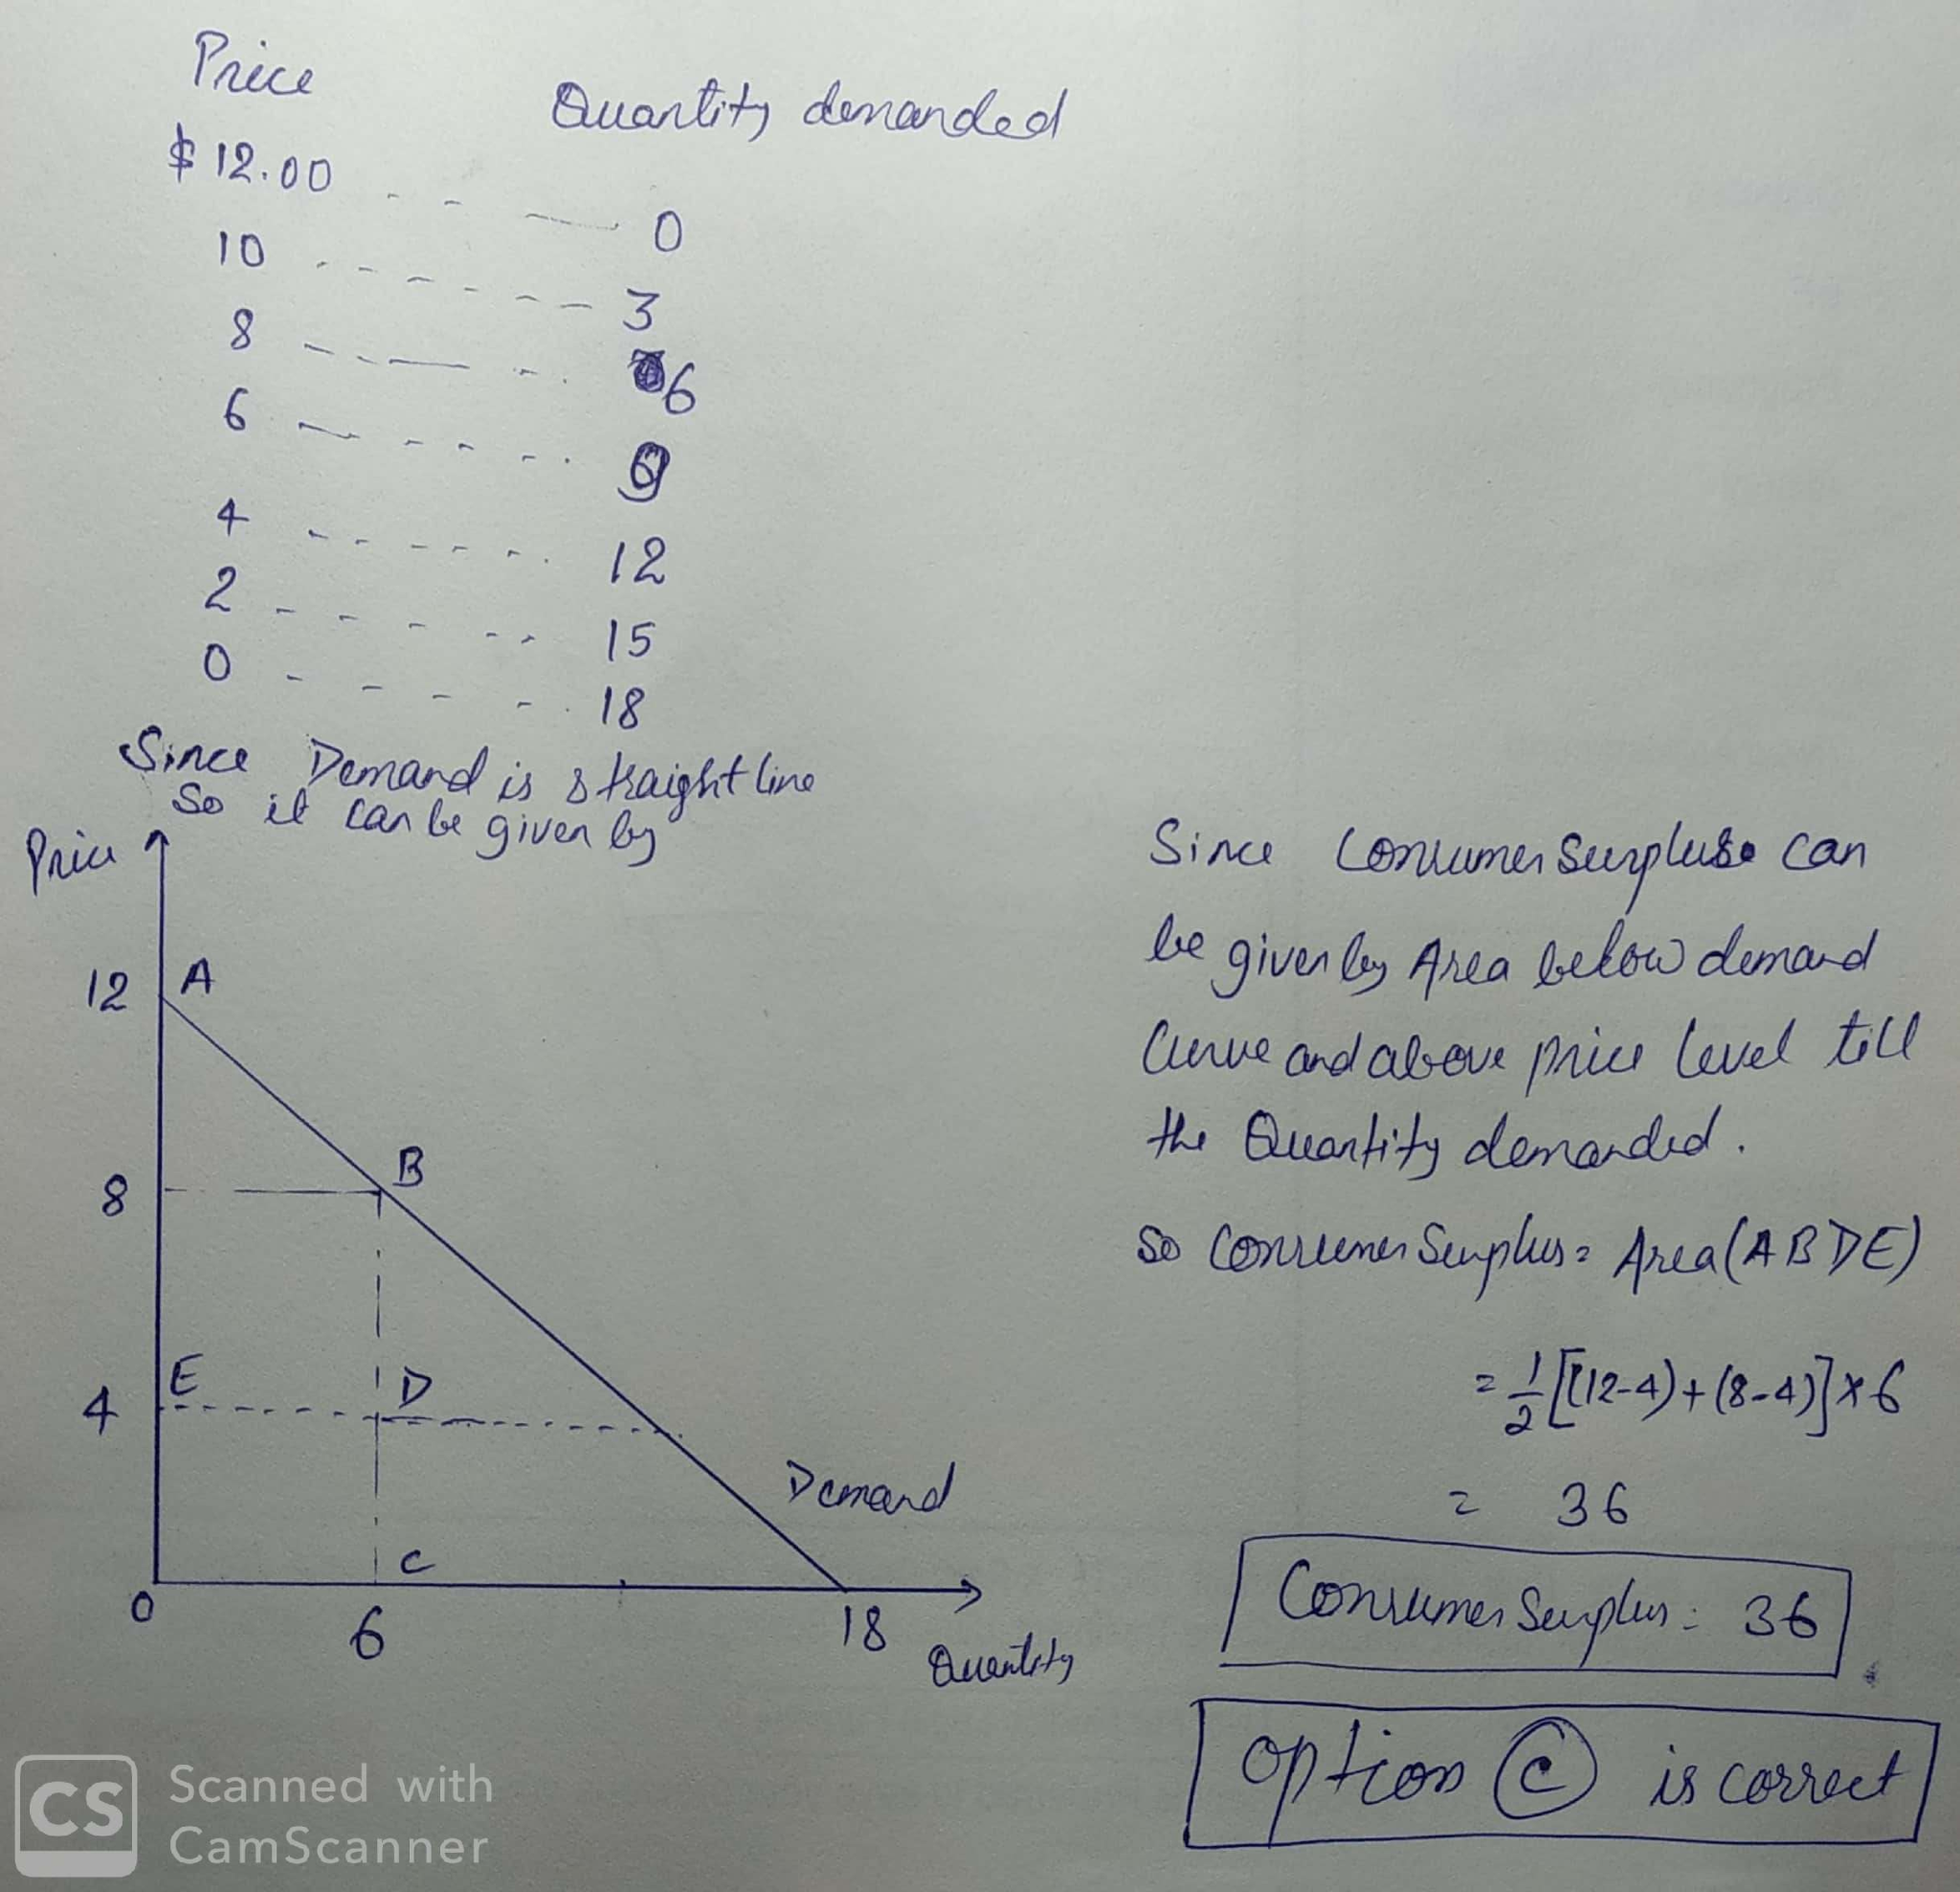 show how to solve without drawing a graph Table 7-16 Quantity Demanded ...